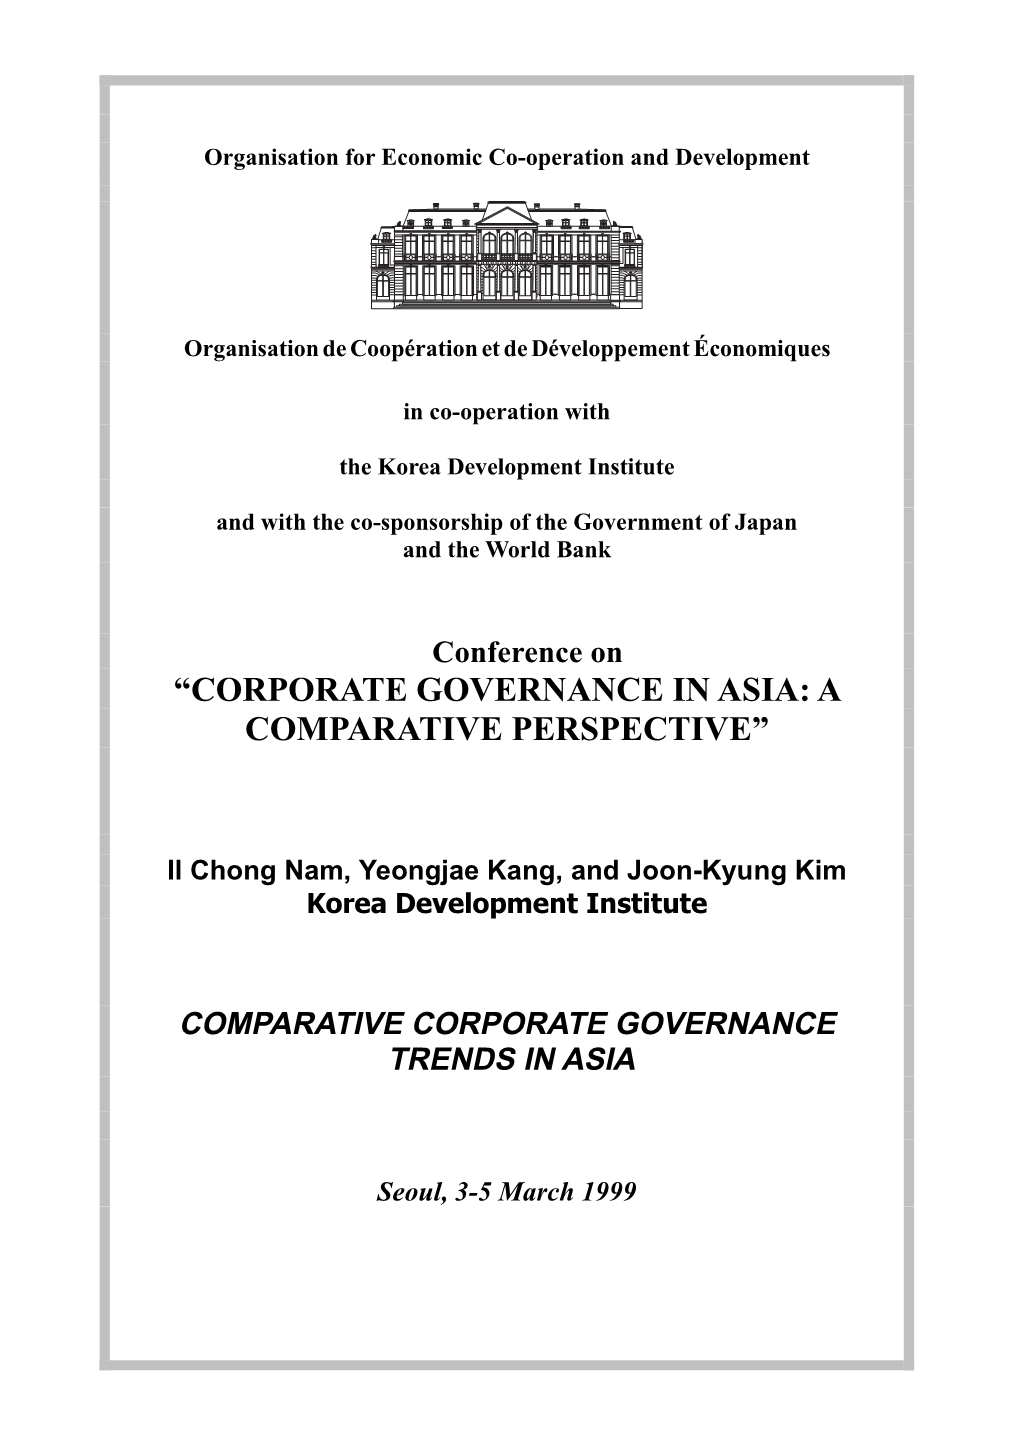 Corporate Governance in Asia: a Comparative Perspective”